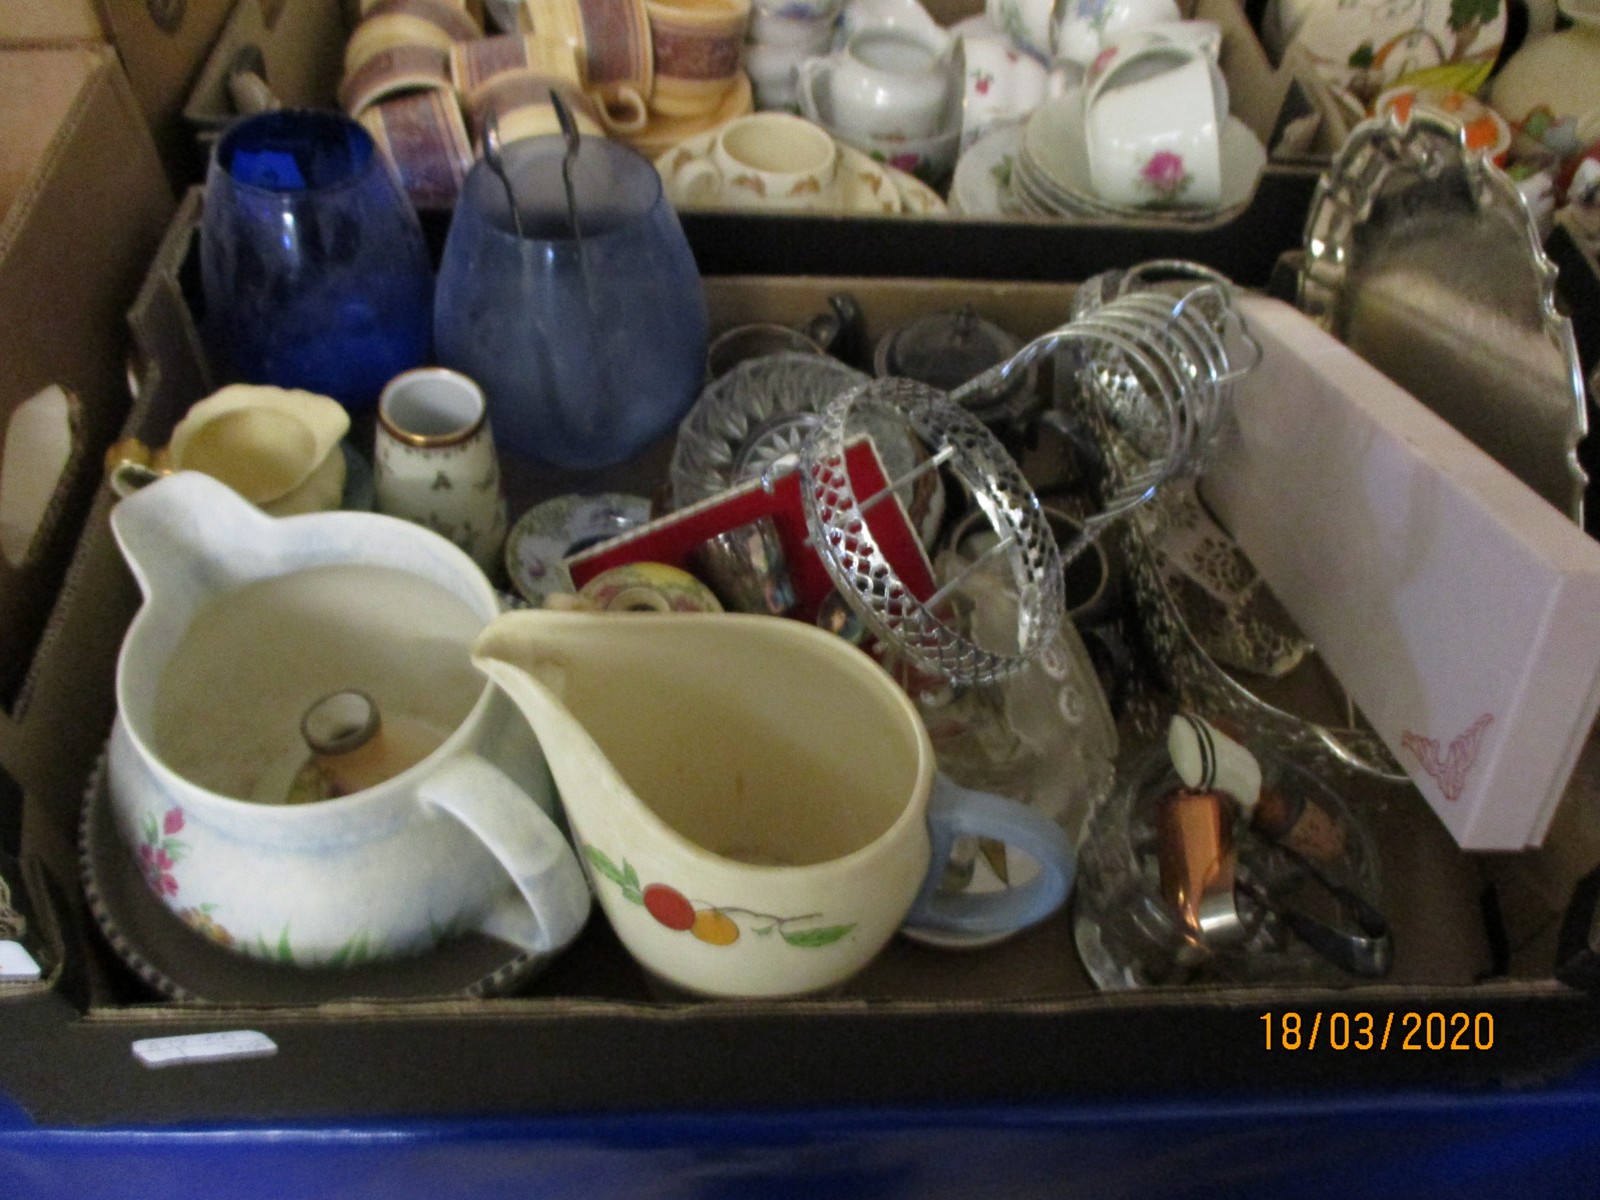 BOX CONTAINING MIXED GLASS WARES, JUGS, SILVER PLATED WARES ETC